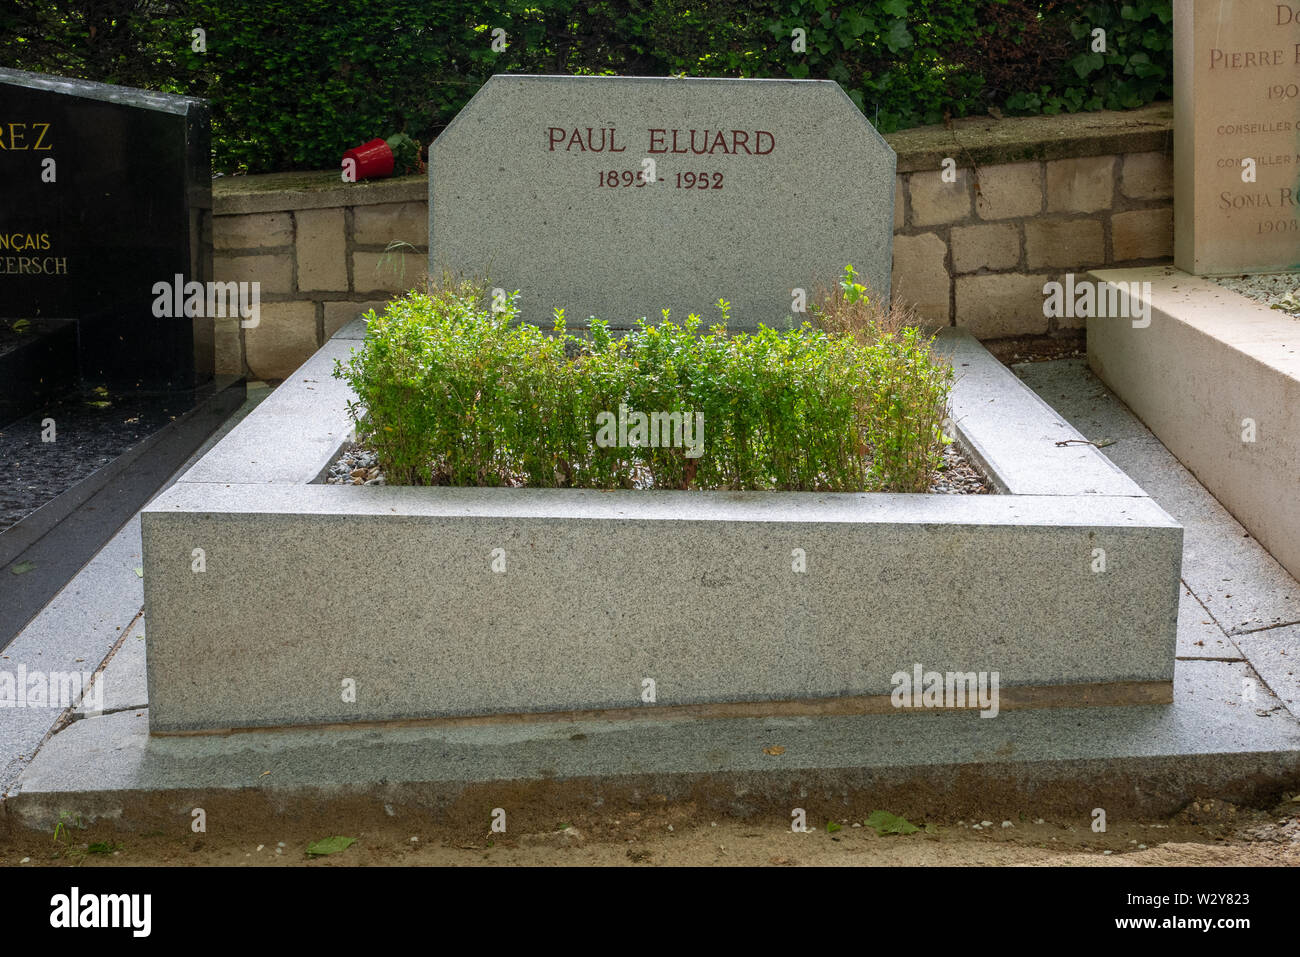 Paris, France - May 28, 2019: the tomb of the famous french poet Paul Eluard at the Pere Lachaise Cemetery. Stock Photo